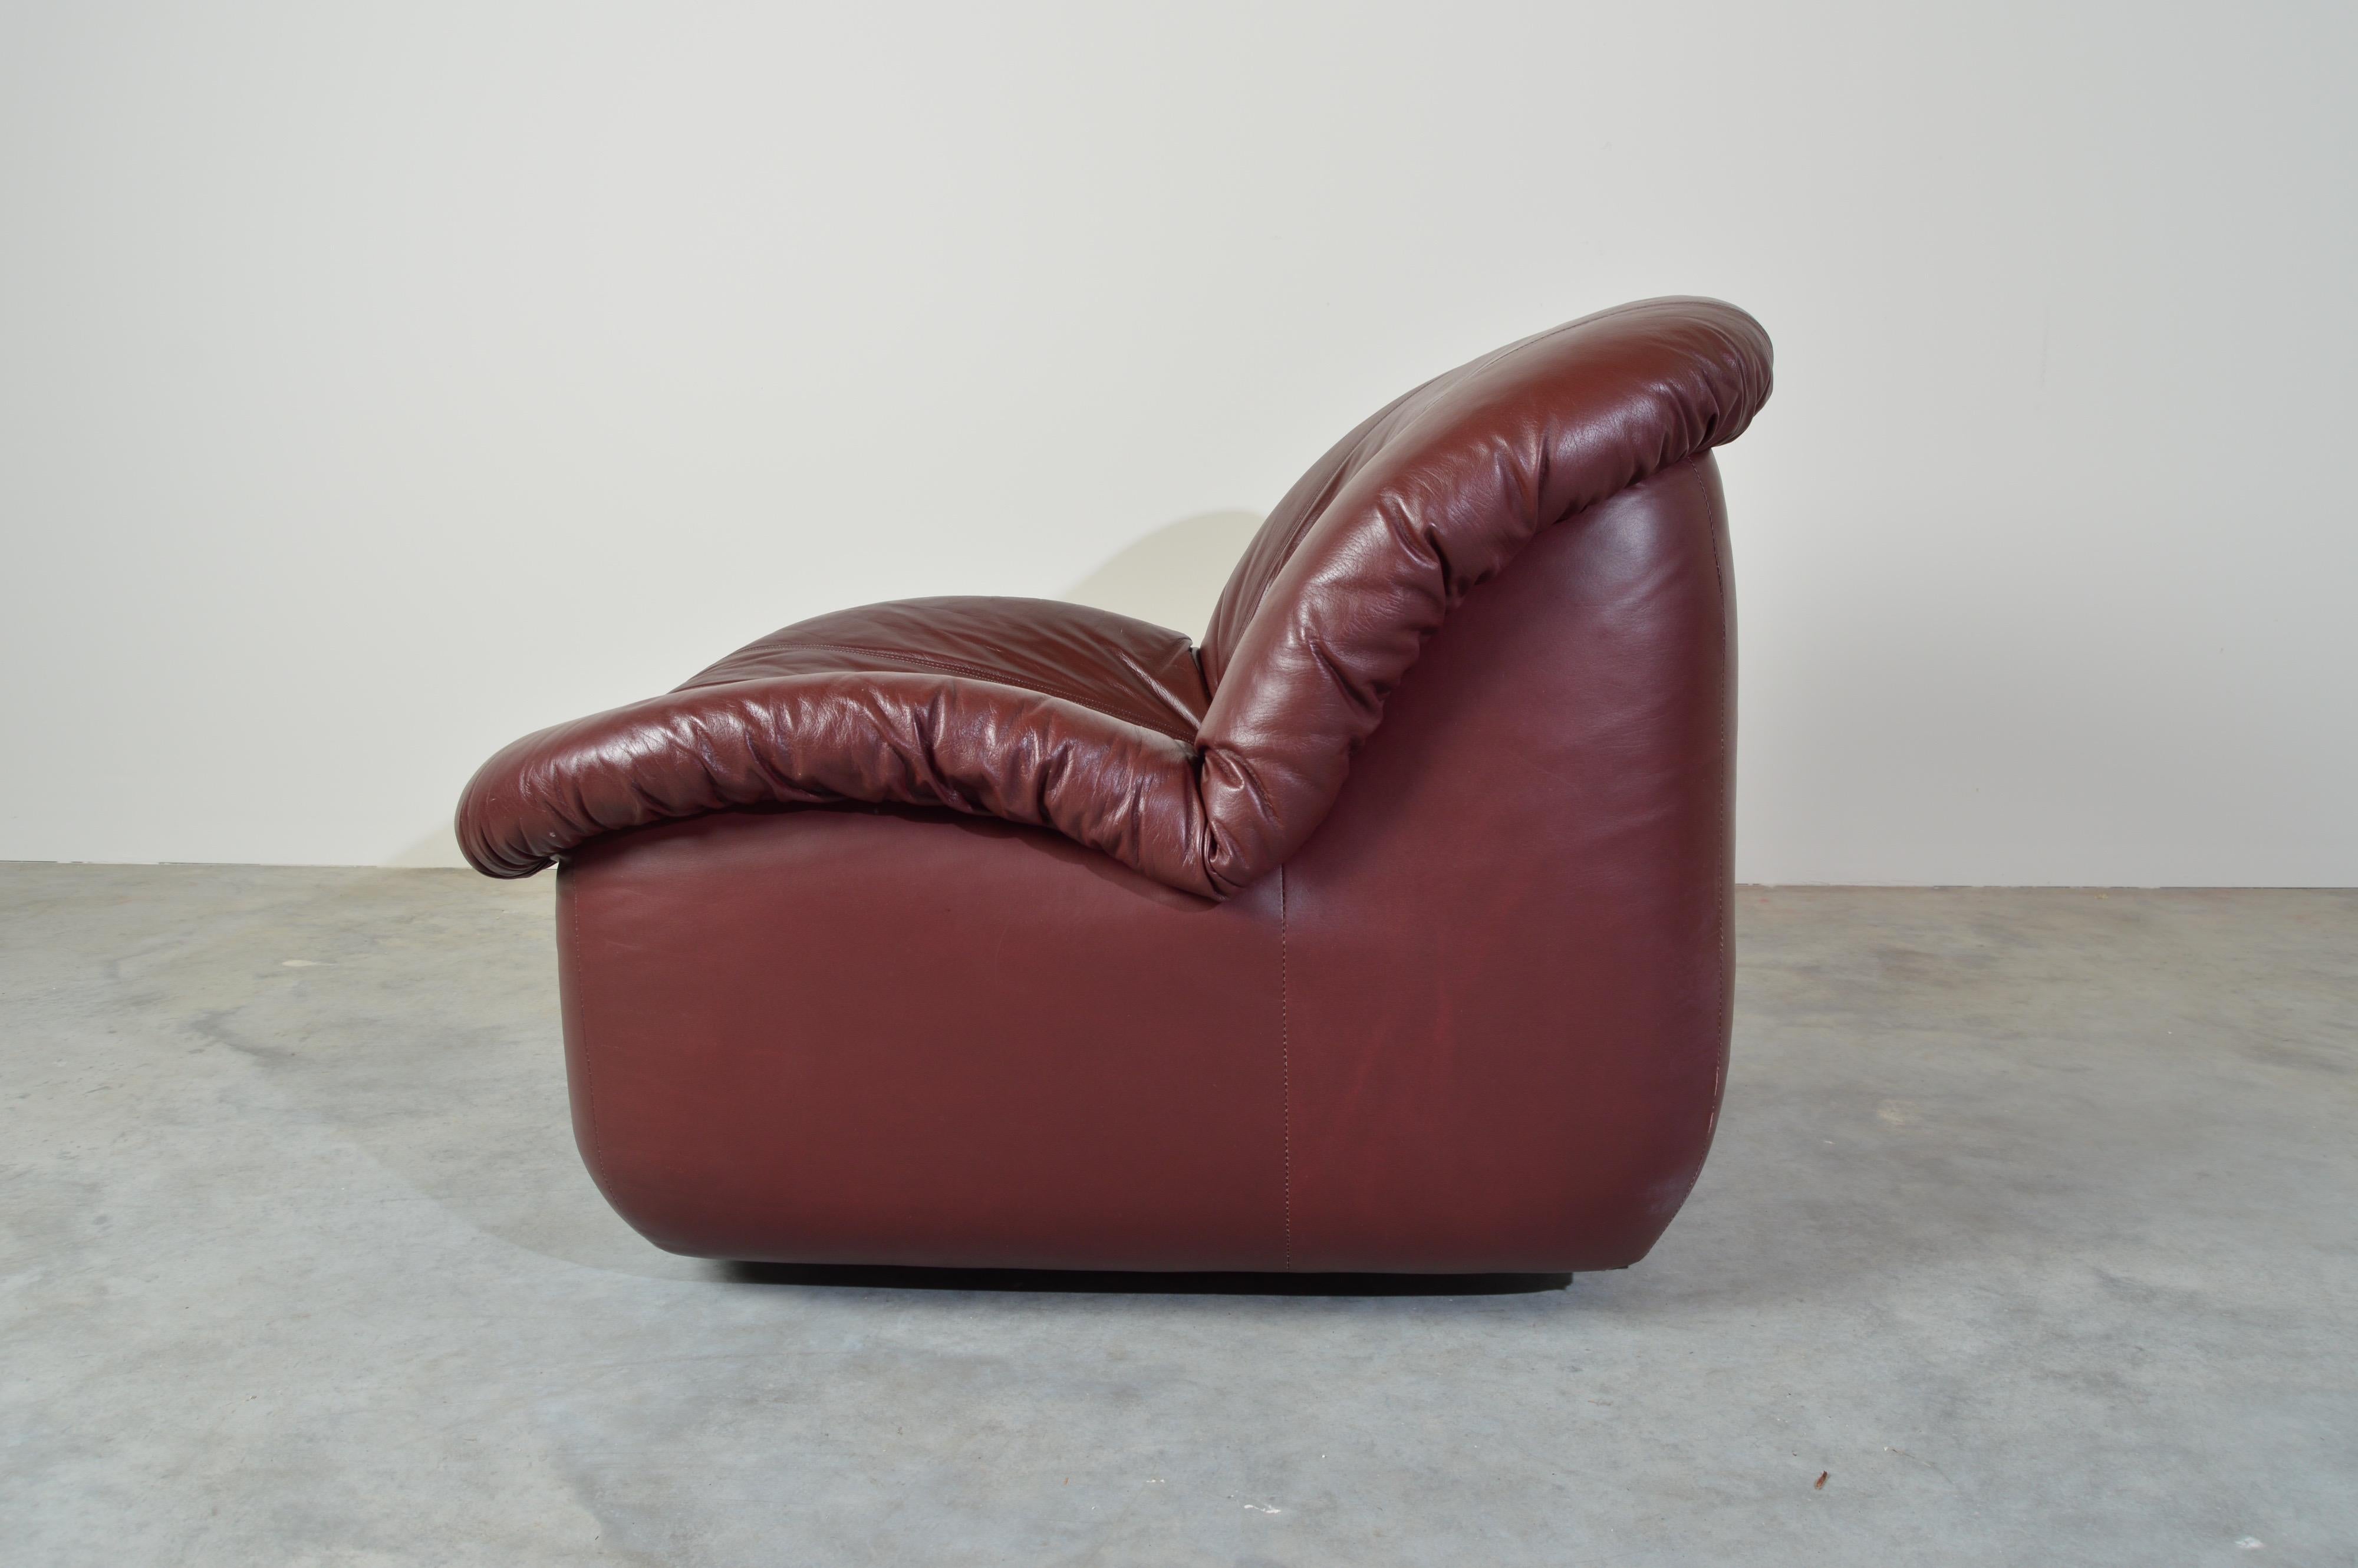 Very comfortable swivel lounge chair by Burris in the manner of Milo Baughman, 1981.
Very clean and well maintained. Rarely used.
Oxblood leather has been regularly conditioned and is beautiful.